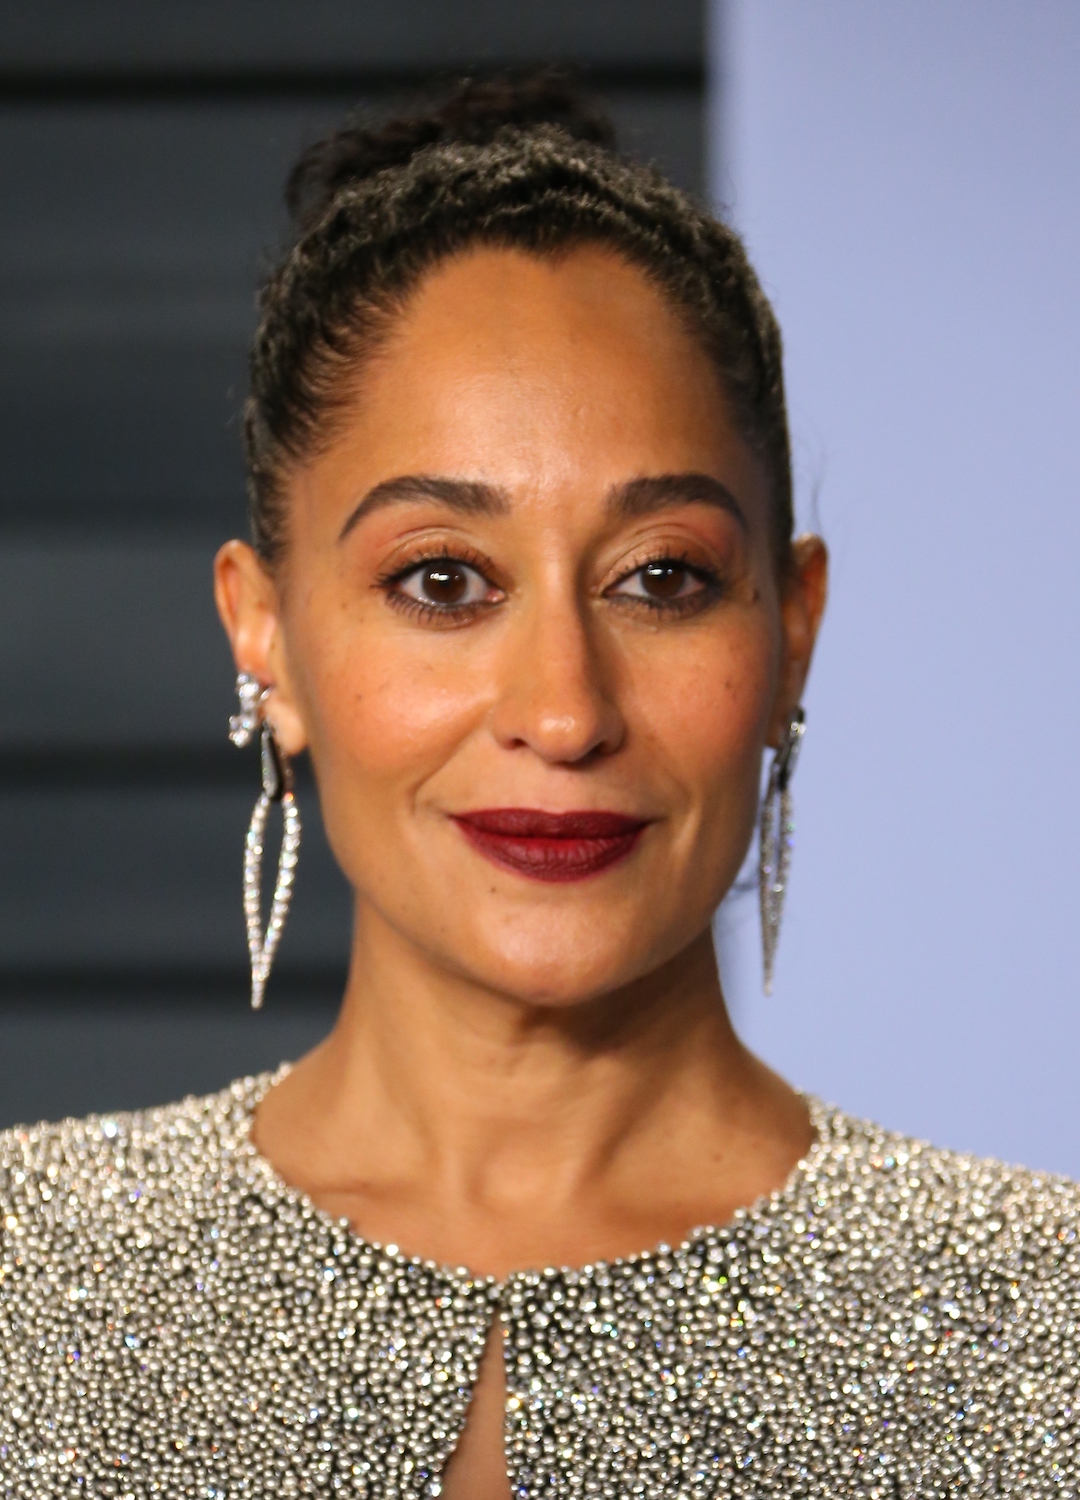 Tracee Ellis Ross attends the 2018 Vanity Fair Oscar Party following the 90th Academy Awards at The Wallis Annenberg Center for the Performing Arts in Beverly Hills, California, on March 04, 2018